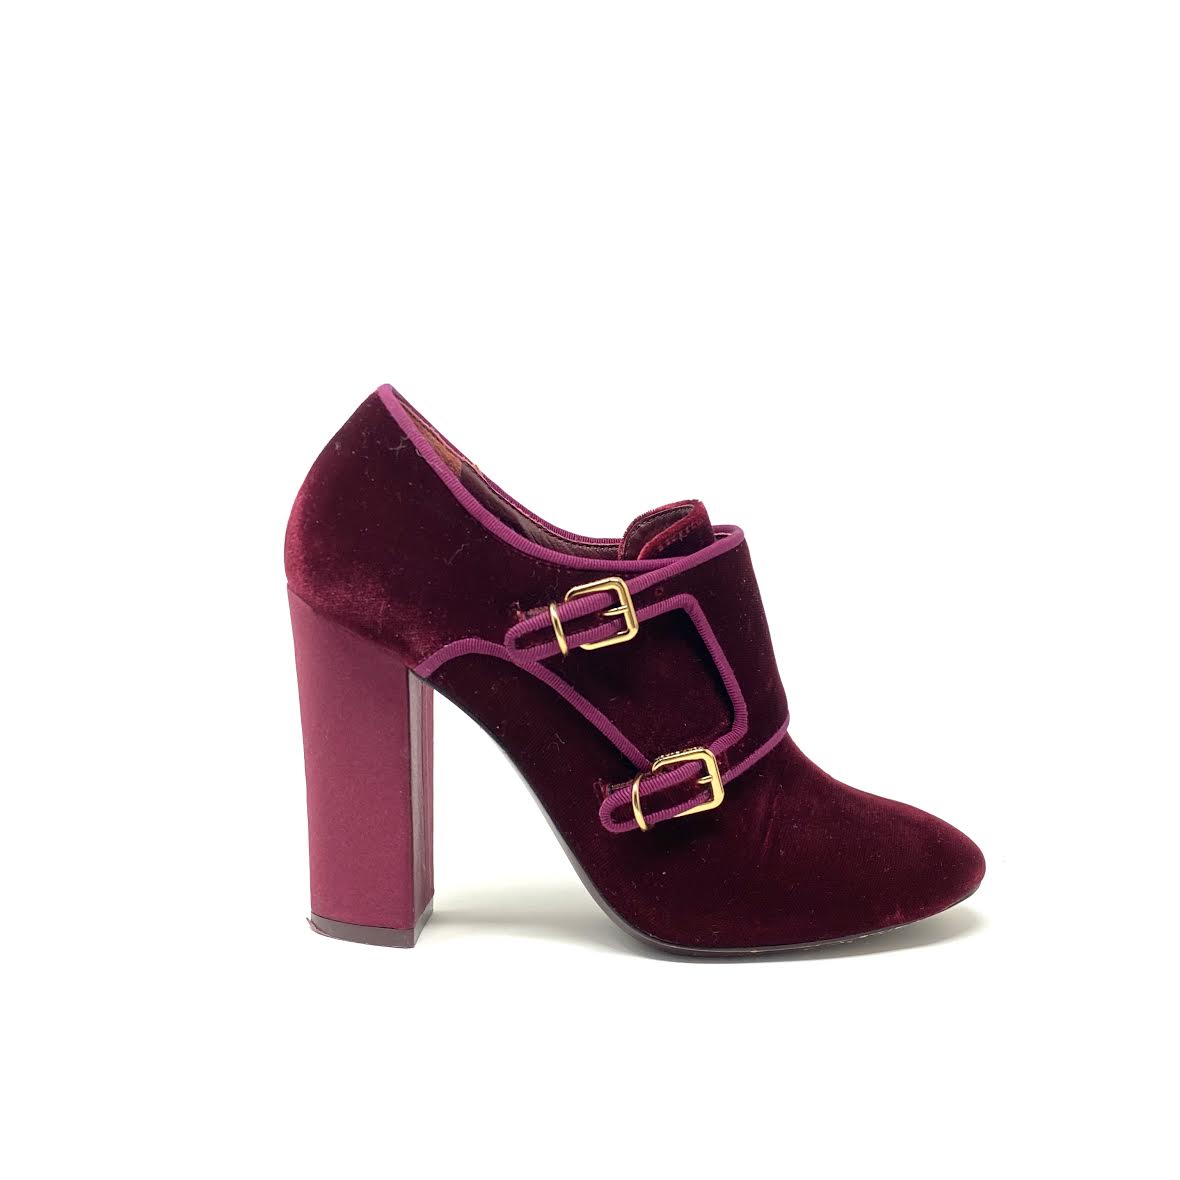 Tory Burch Carley Velvet Ankle Boots - Size 